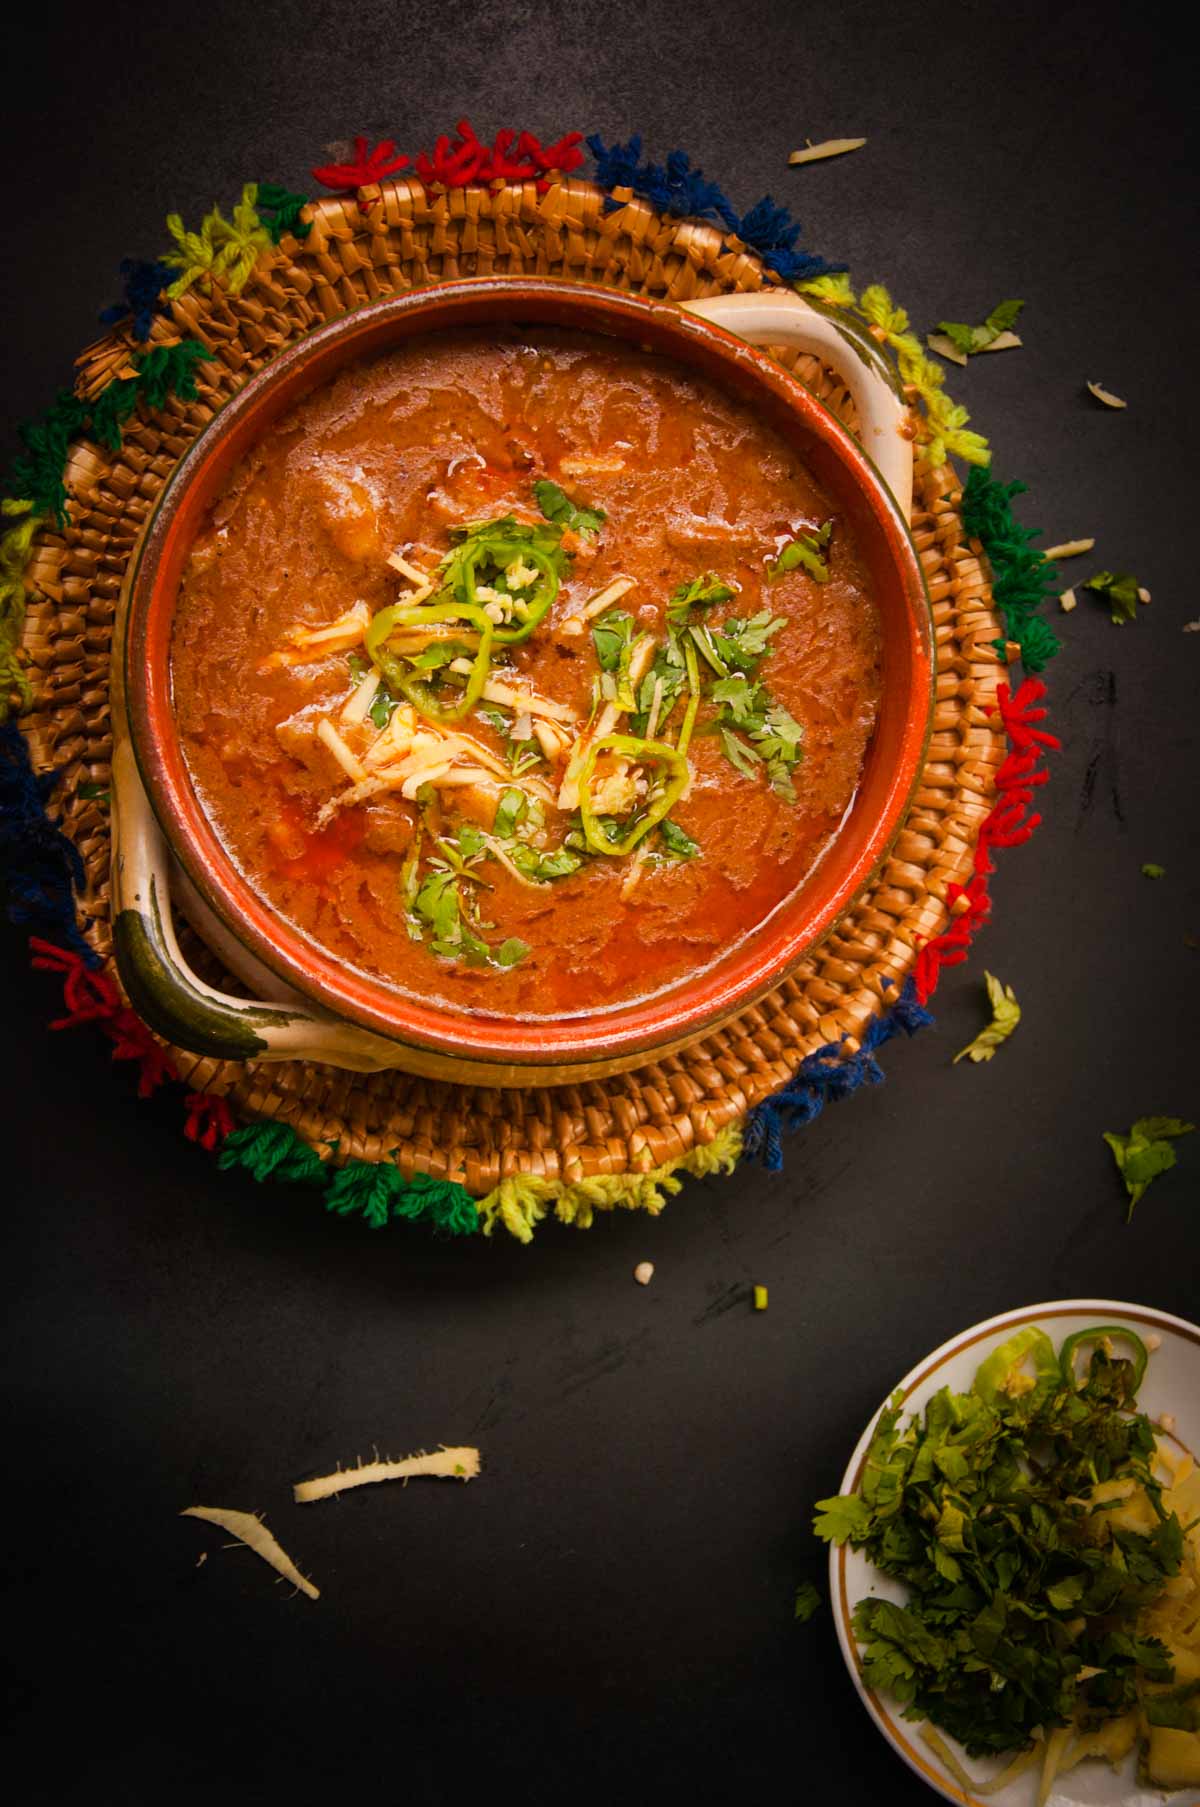 Nihari served in clay pot over black background.